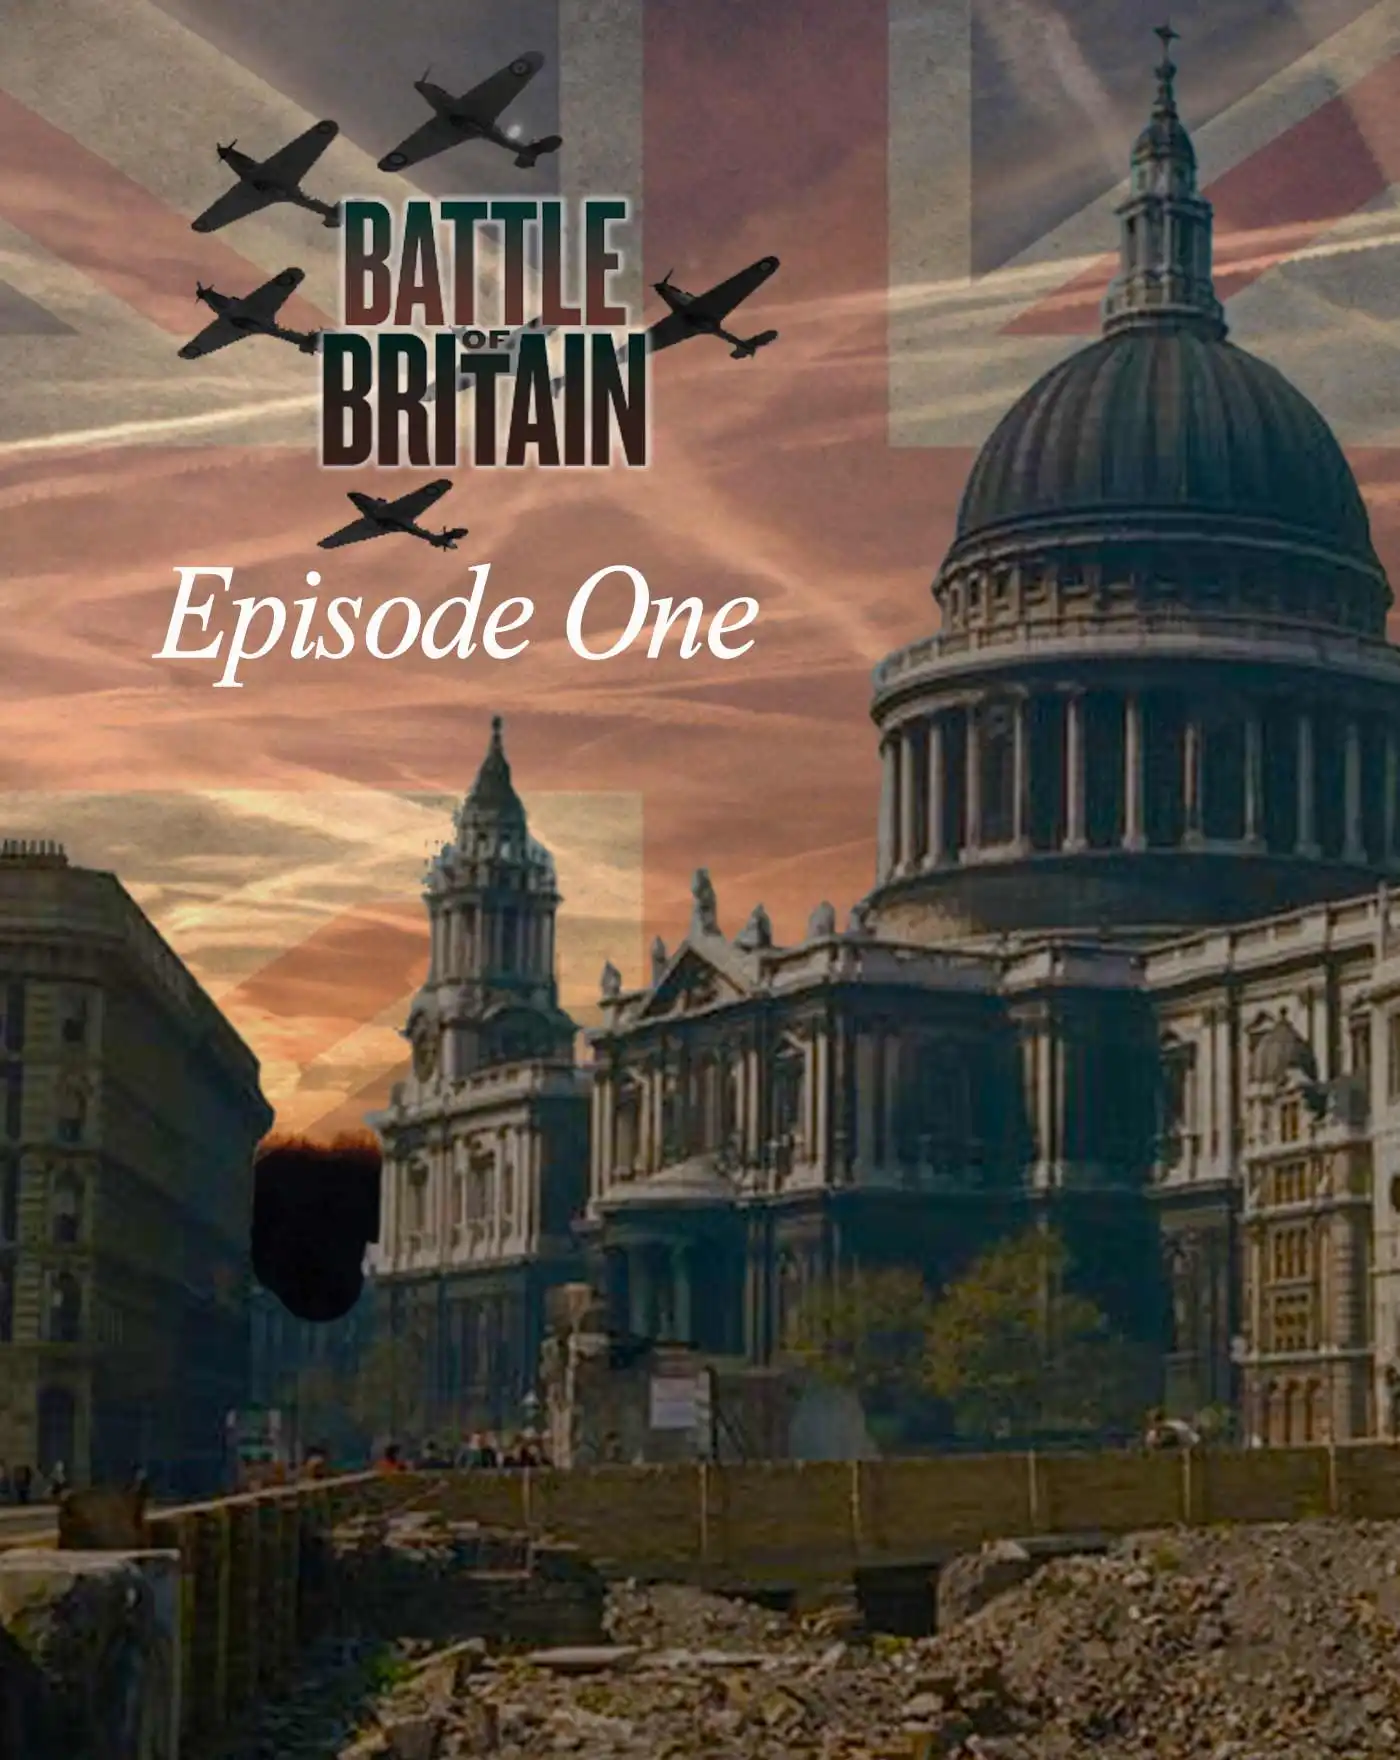 The Battle of Britain Episode One